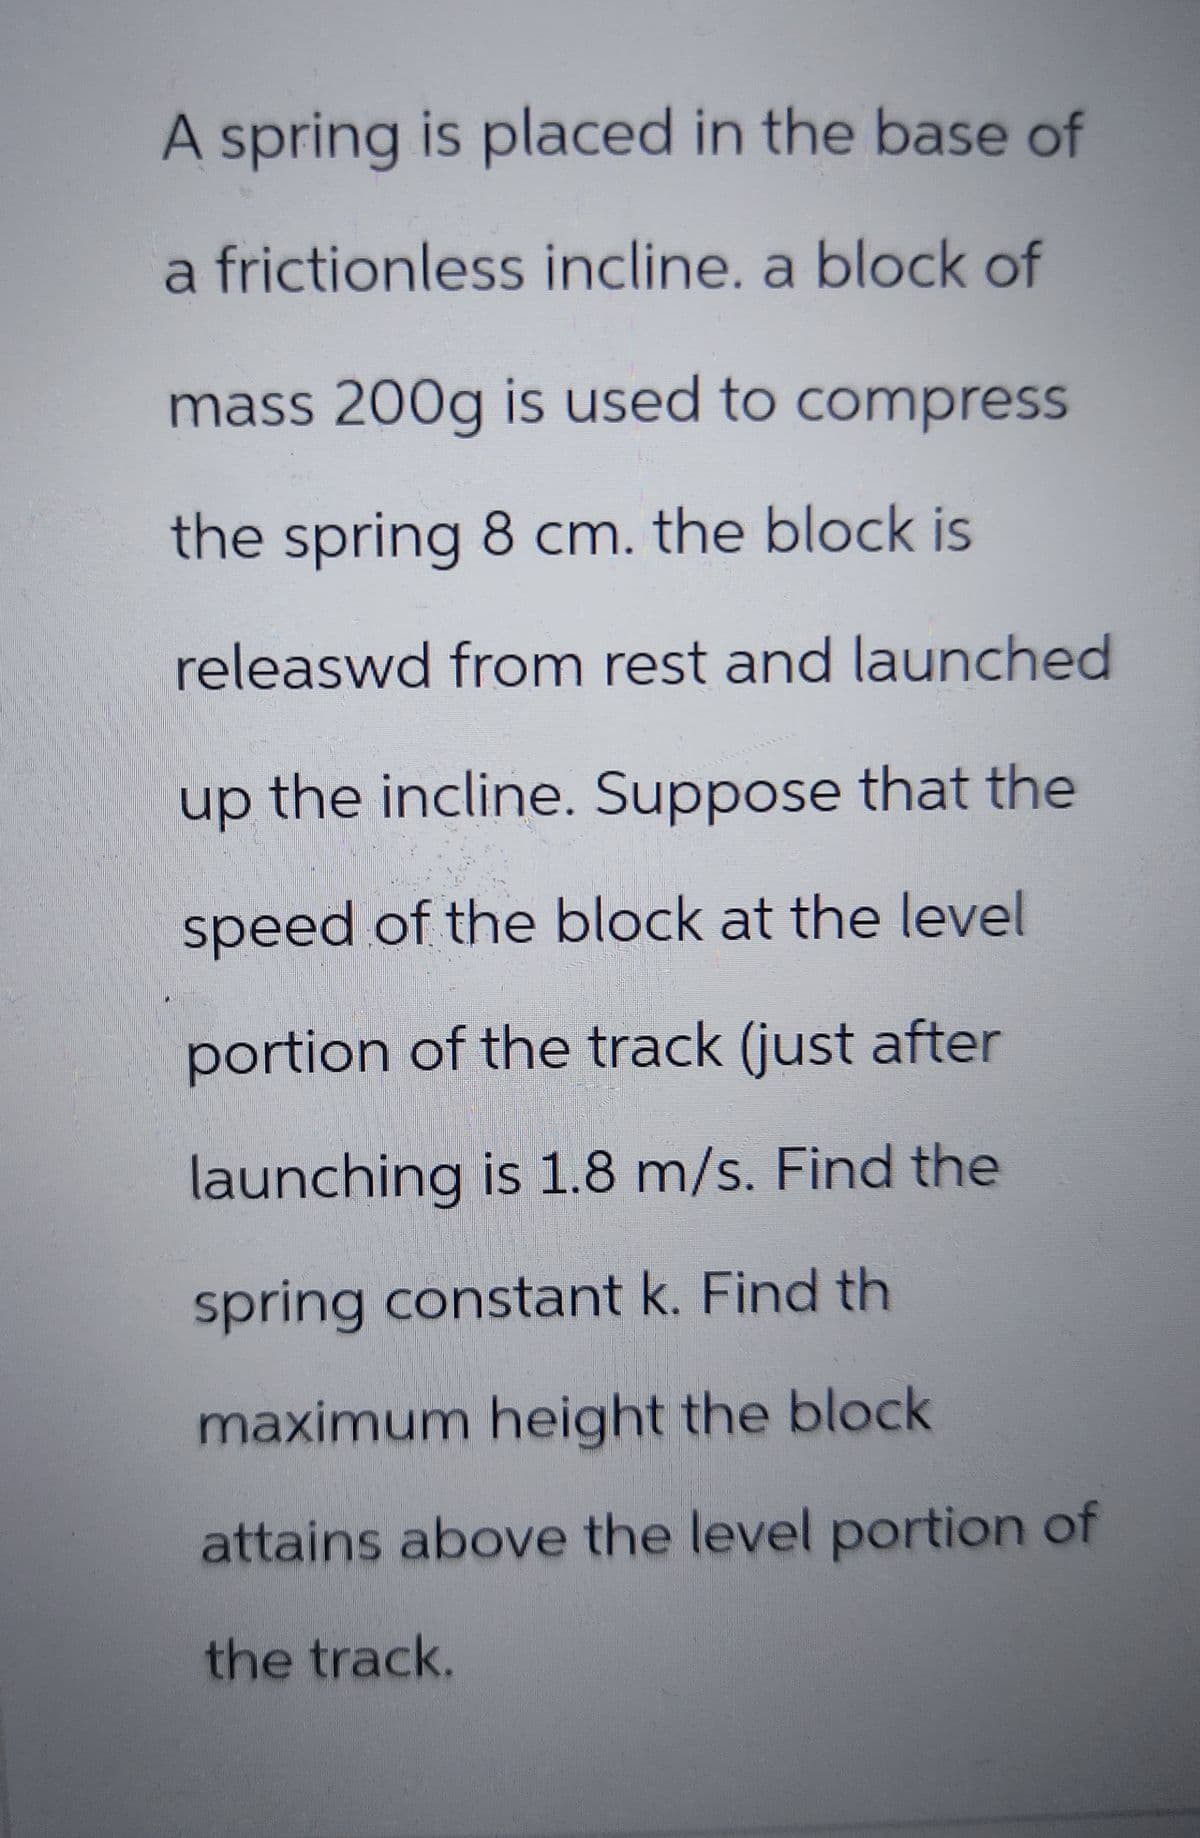 A spring is placed in the base of
a frictionless incline. a block of
mass 200g is used to compress
the spring 8 cm. the block is
released from rest and launched
up the incline. Suppose that the
speed of the block at the level
portion of the track (just after
launching is 1.8 m/s. Find the
spring constant k. Find th
maximum height the block
attains above the level portion of
the track.